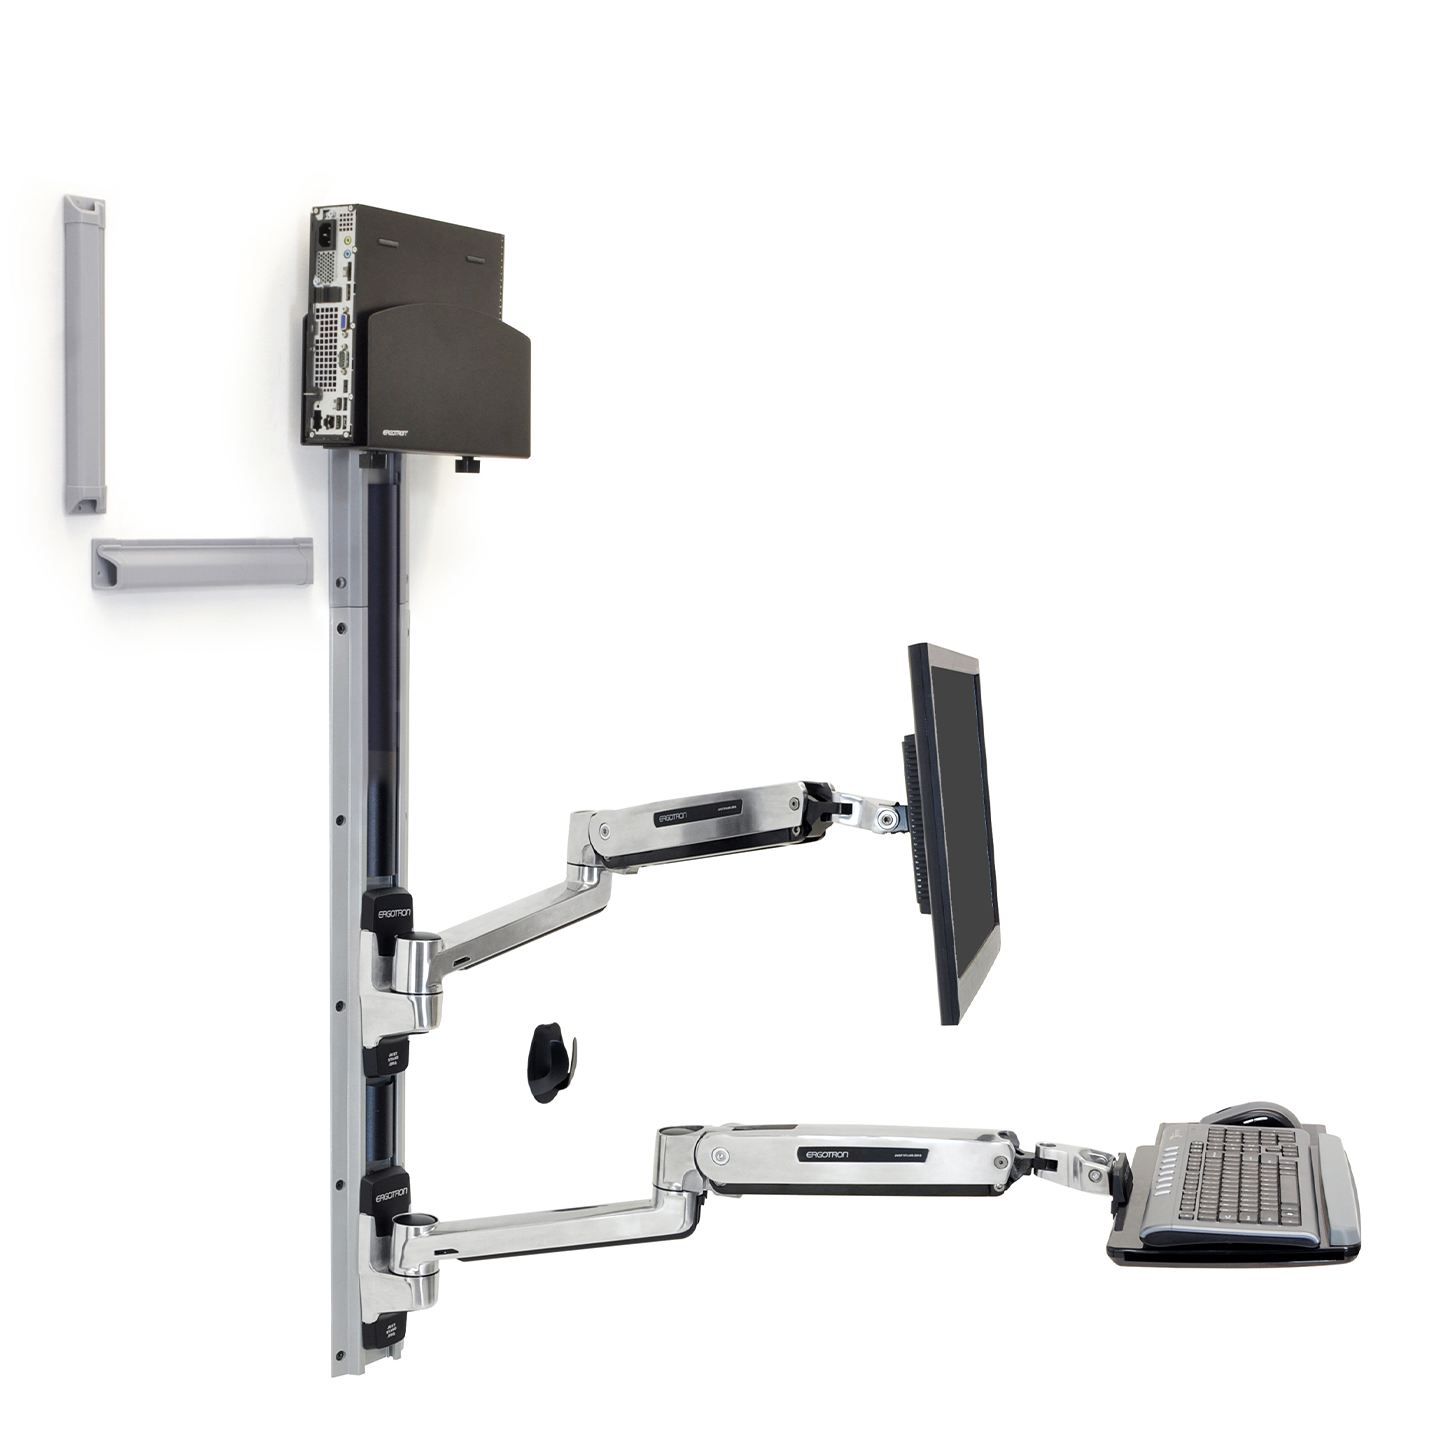 See Haworth Health's Ergotron LX Sit-Stand Wall System